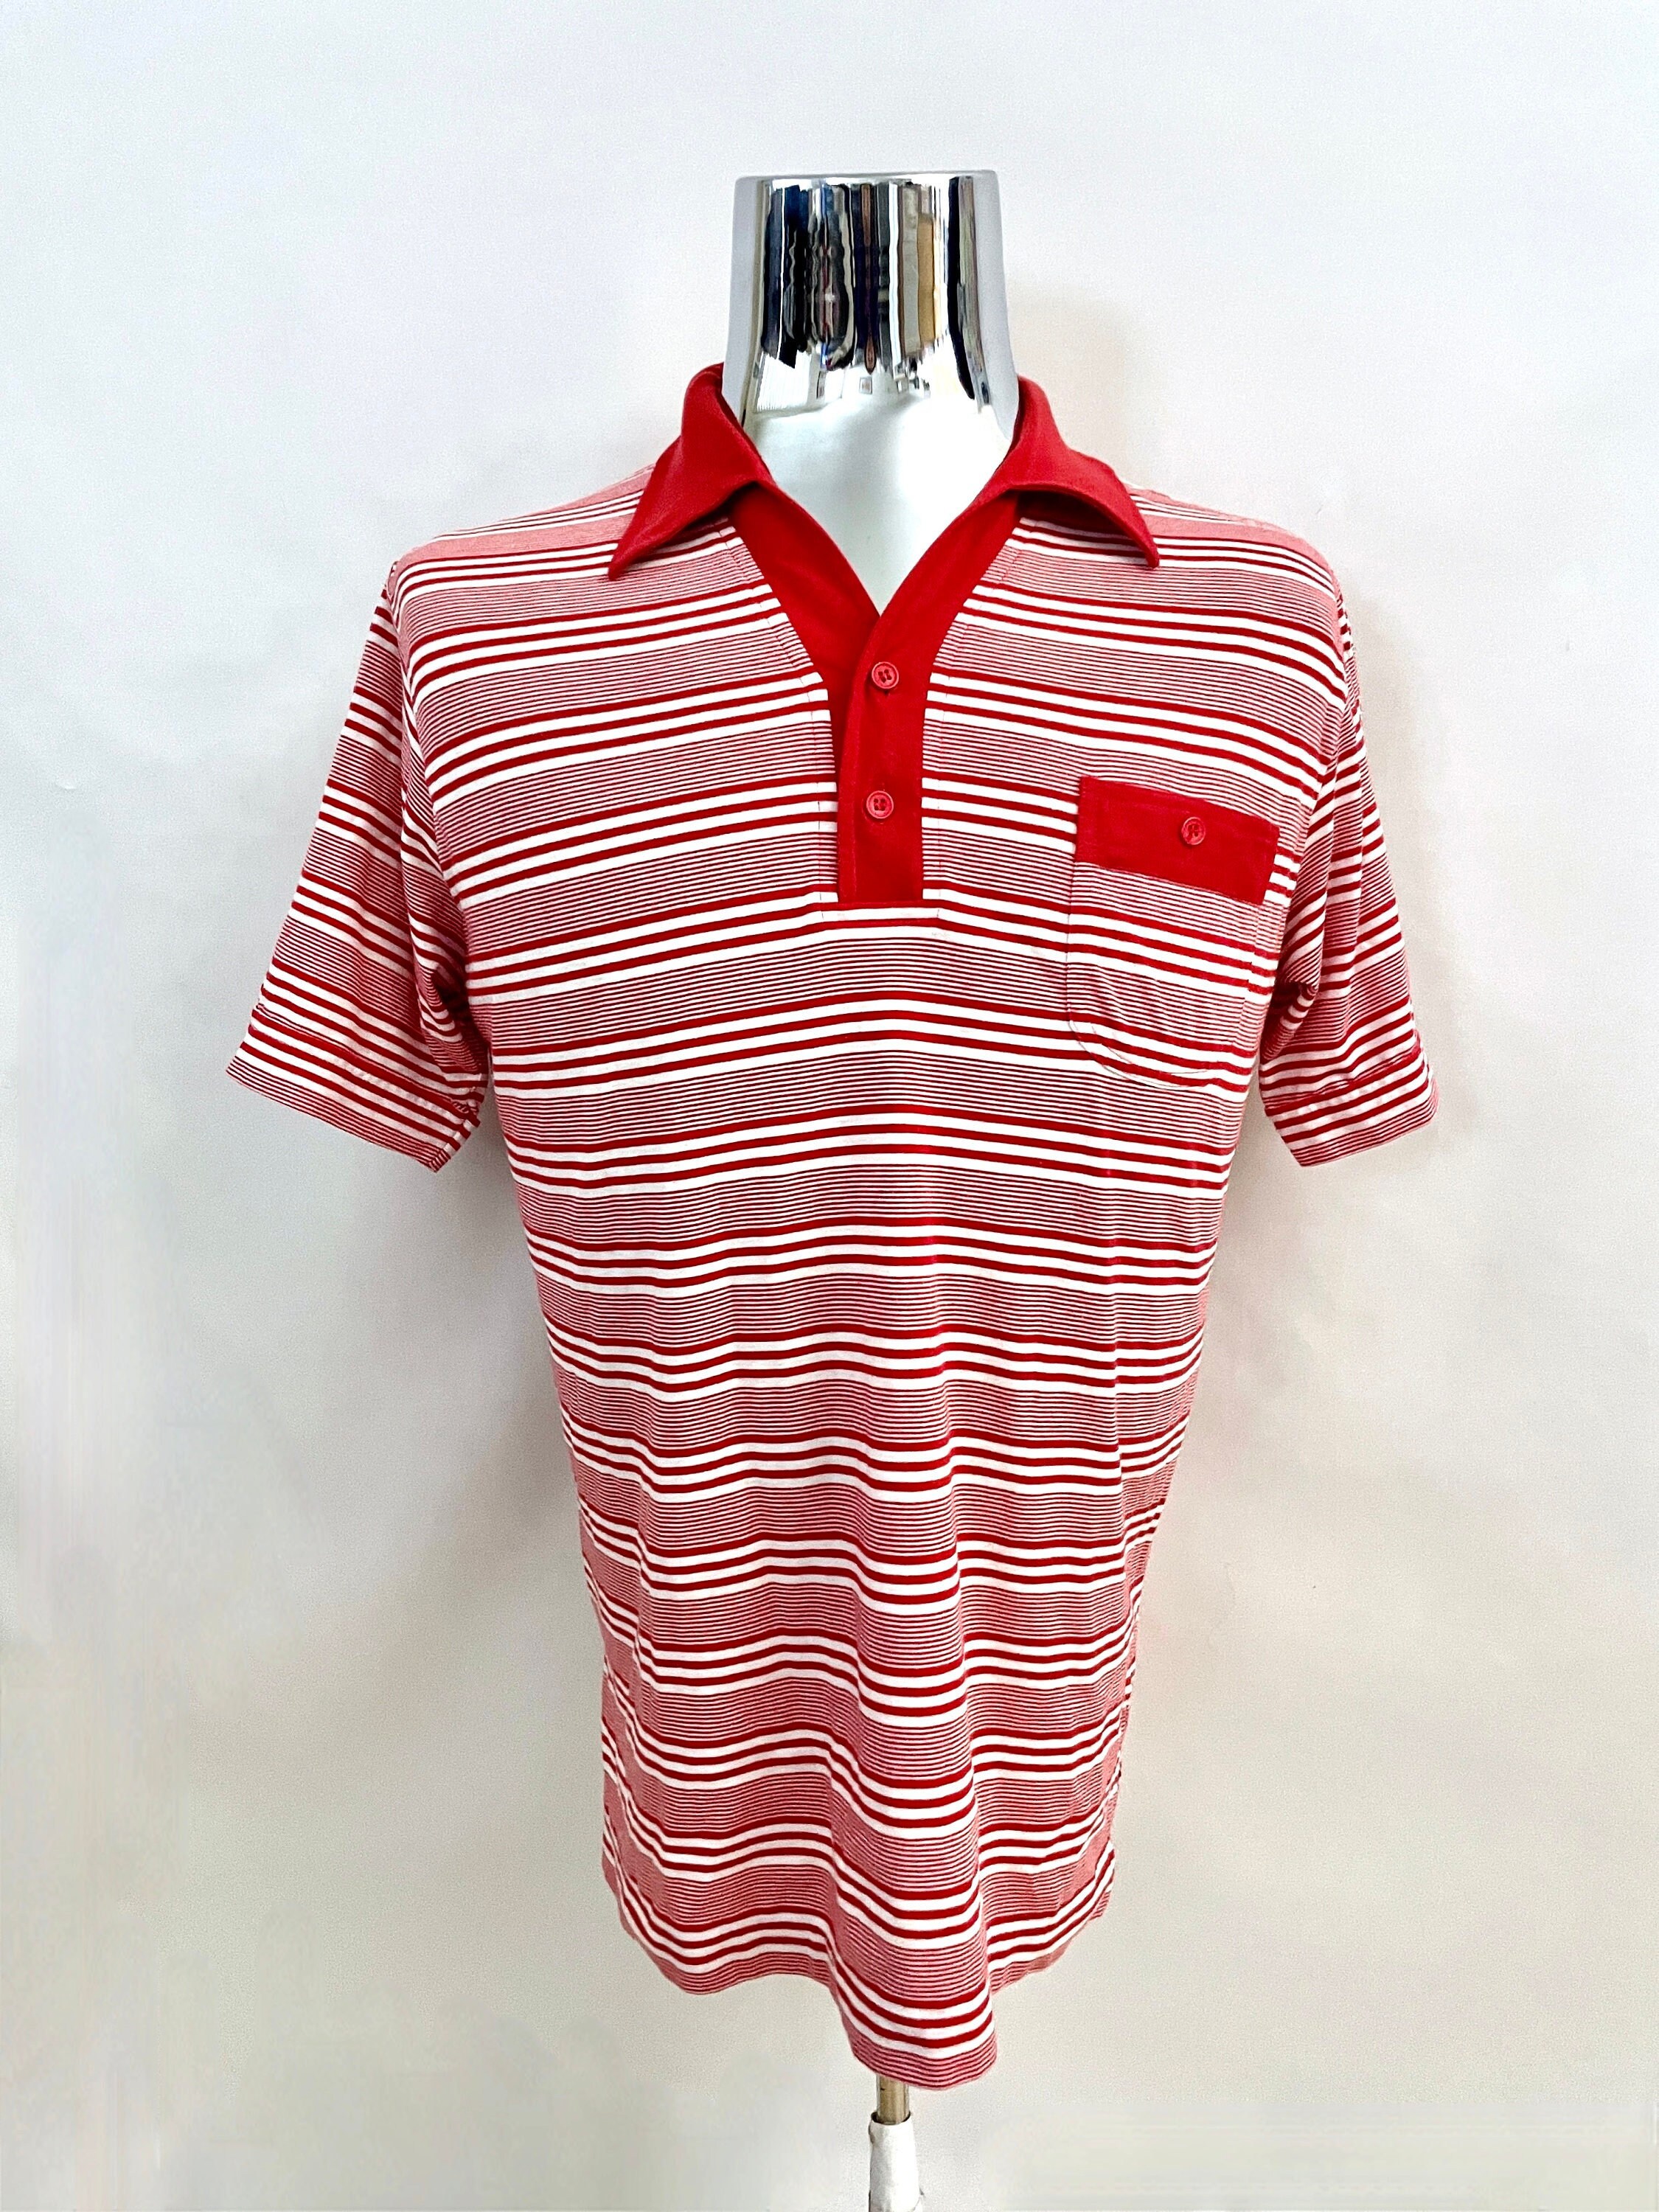 Detroit Red Wings Polo, Red Wings Polos, Golf Shirts